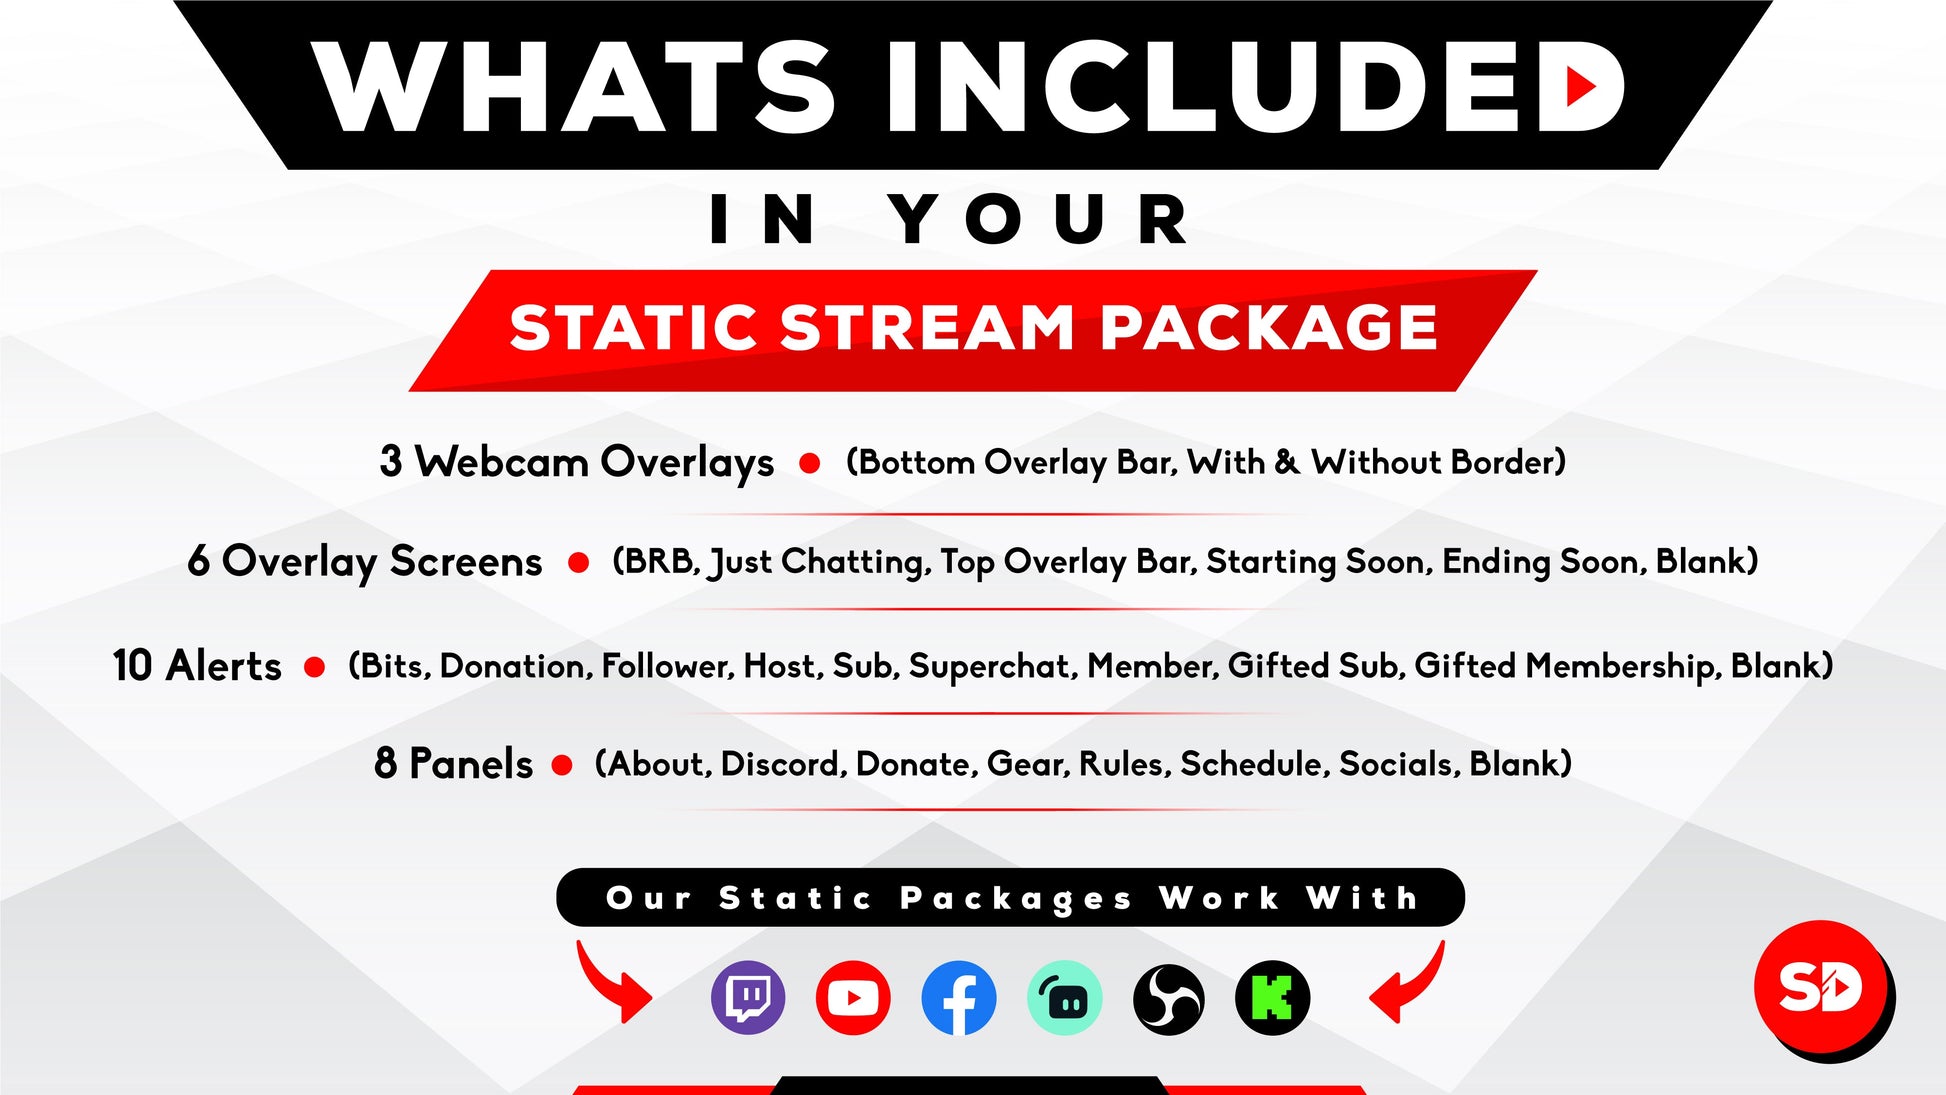 whats included in your static stream package - storm - stream designz